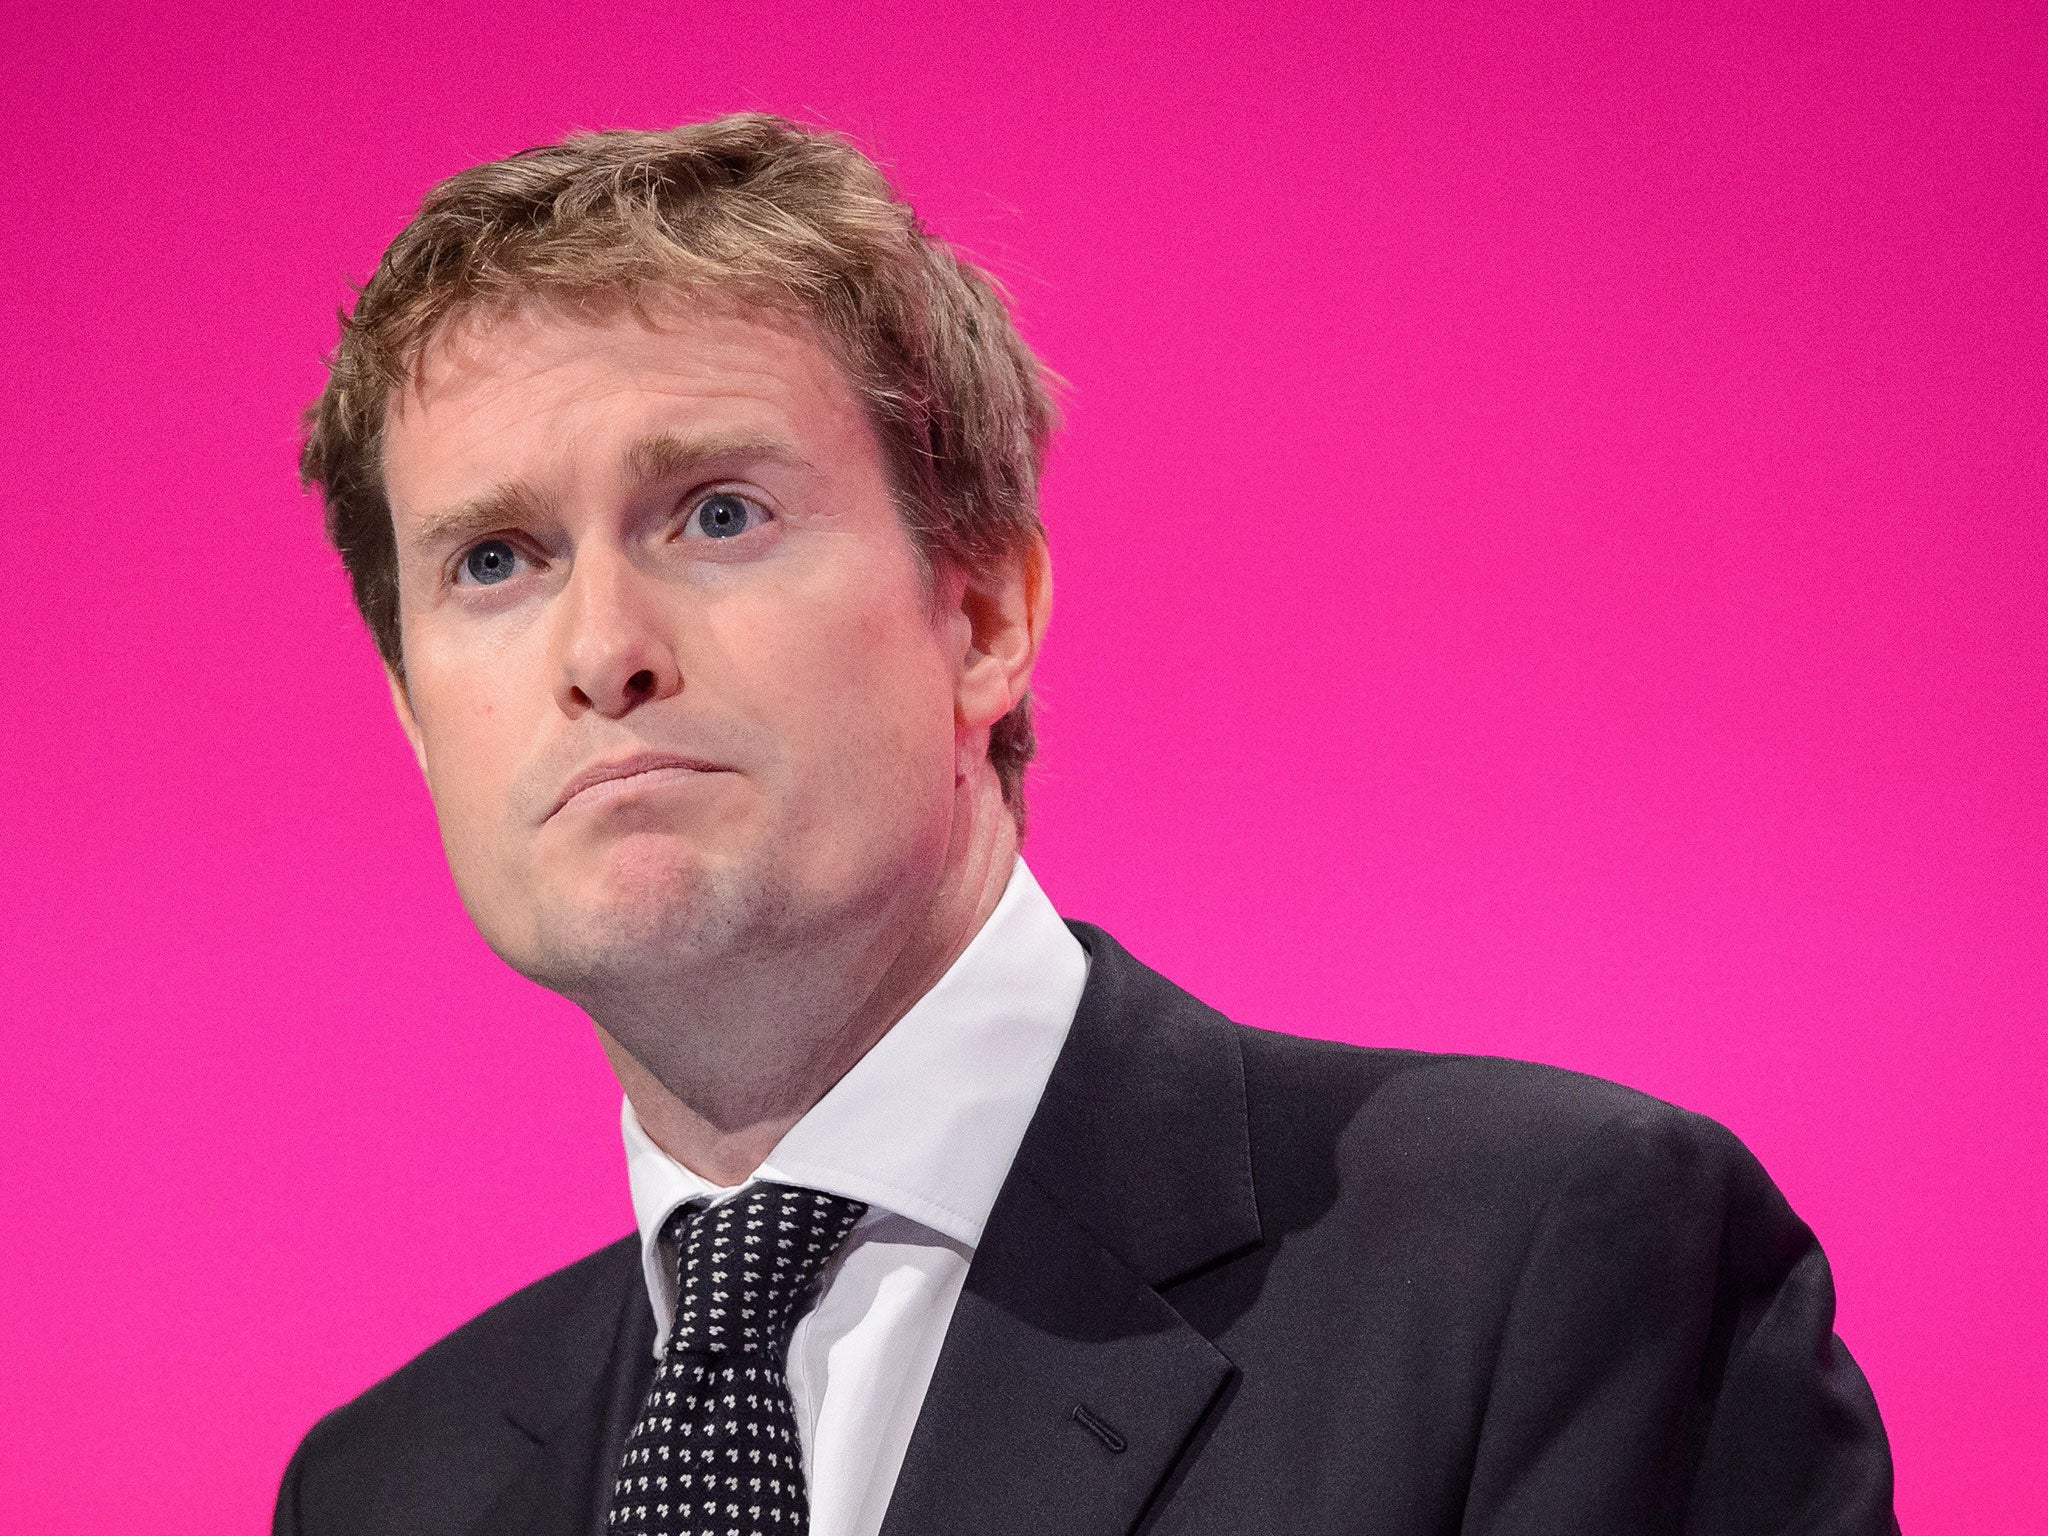 Labour Party education spokesman Tristram Hunt speaks to delegates in the exhibition hall in Manchester on September 21, 2014 on the first day of the Labour Party conference.